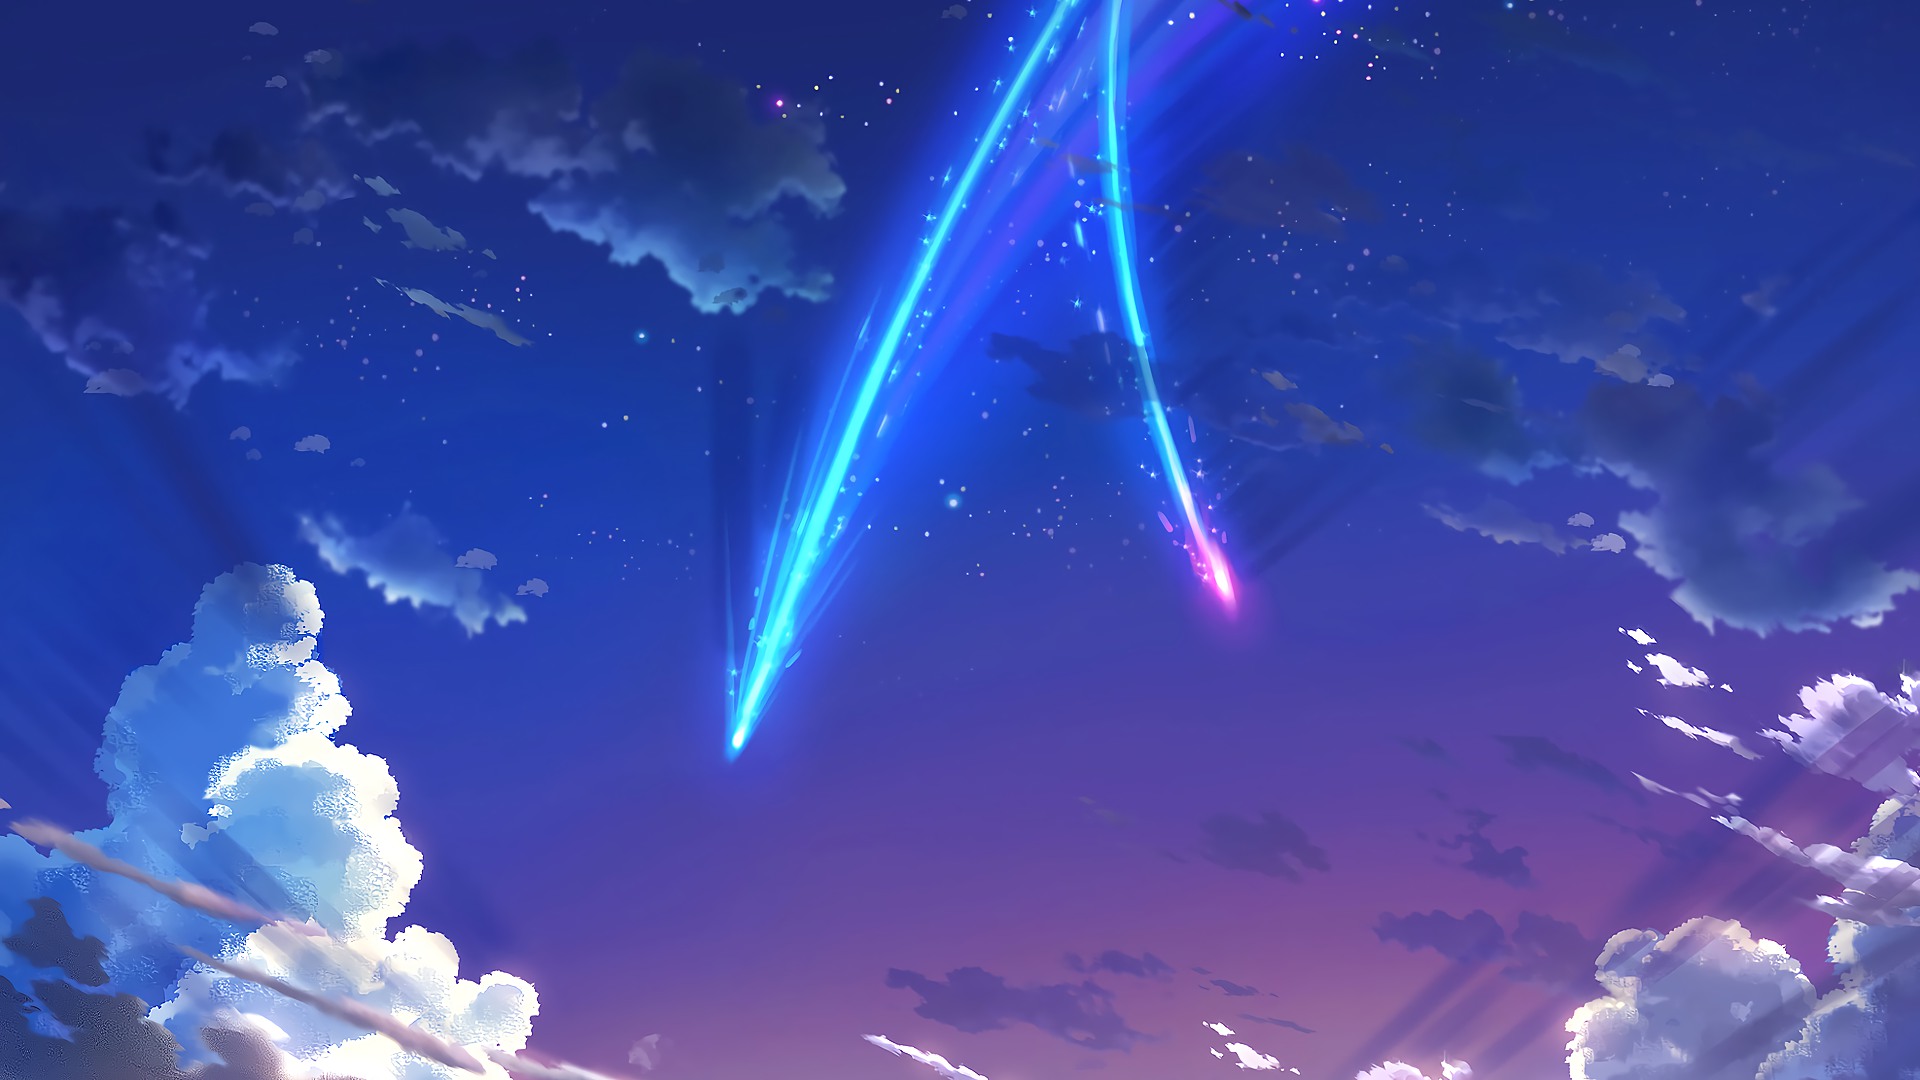 Your Name Movie Wallpaper